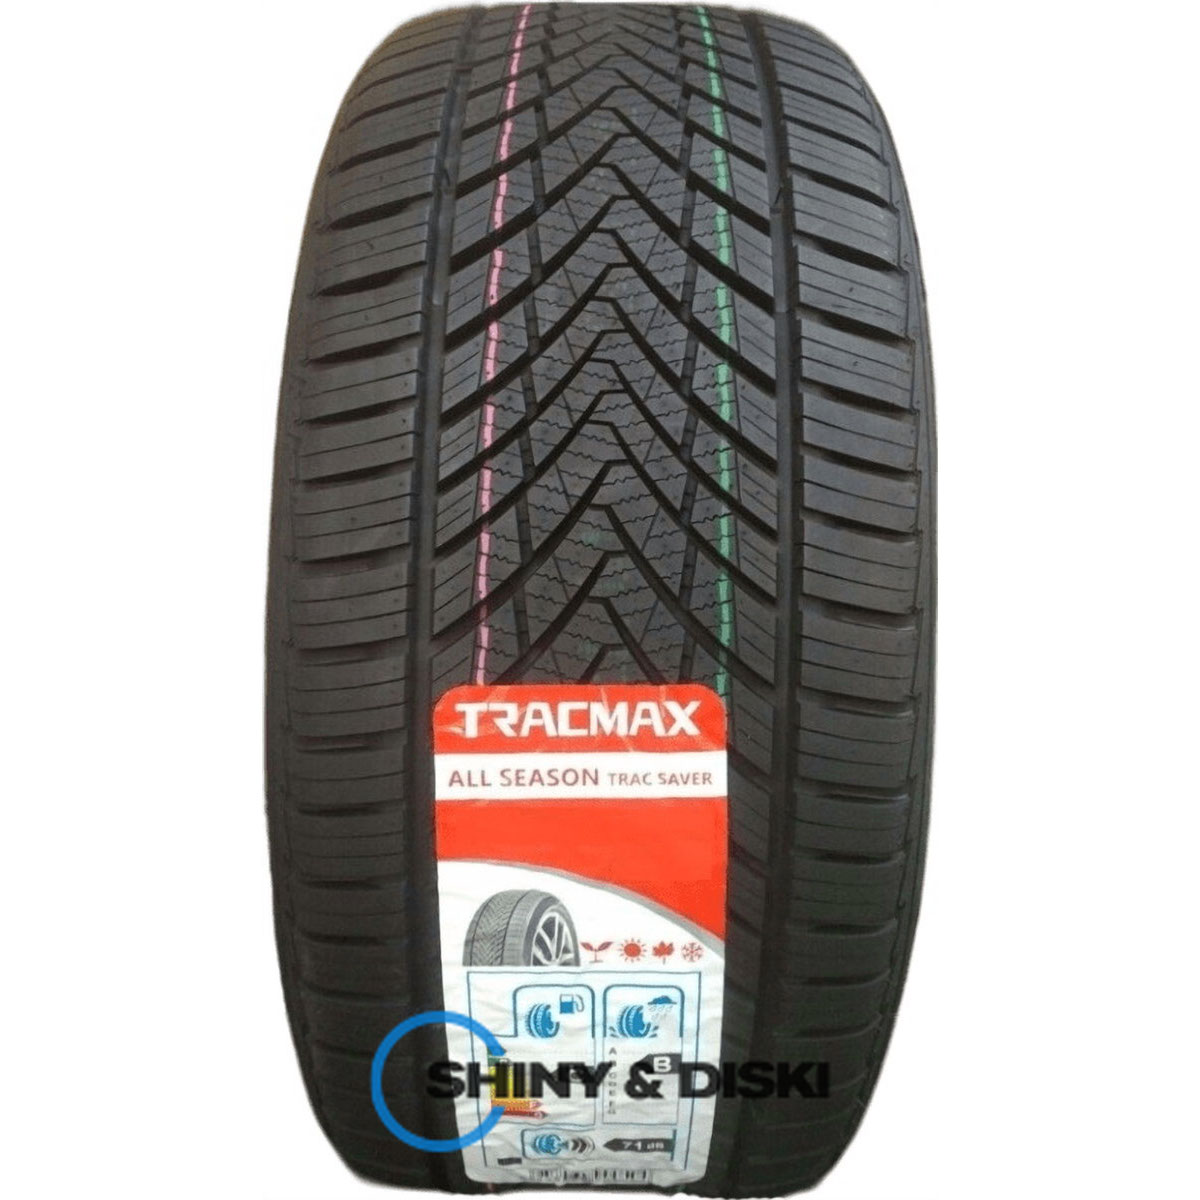 покрышки tracmax a/s trac saver 165/70 r13 79t